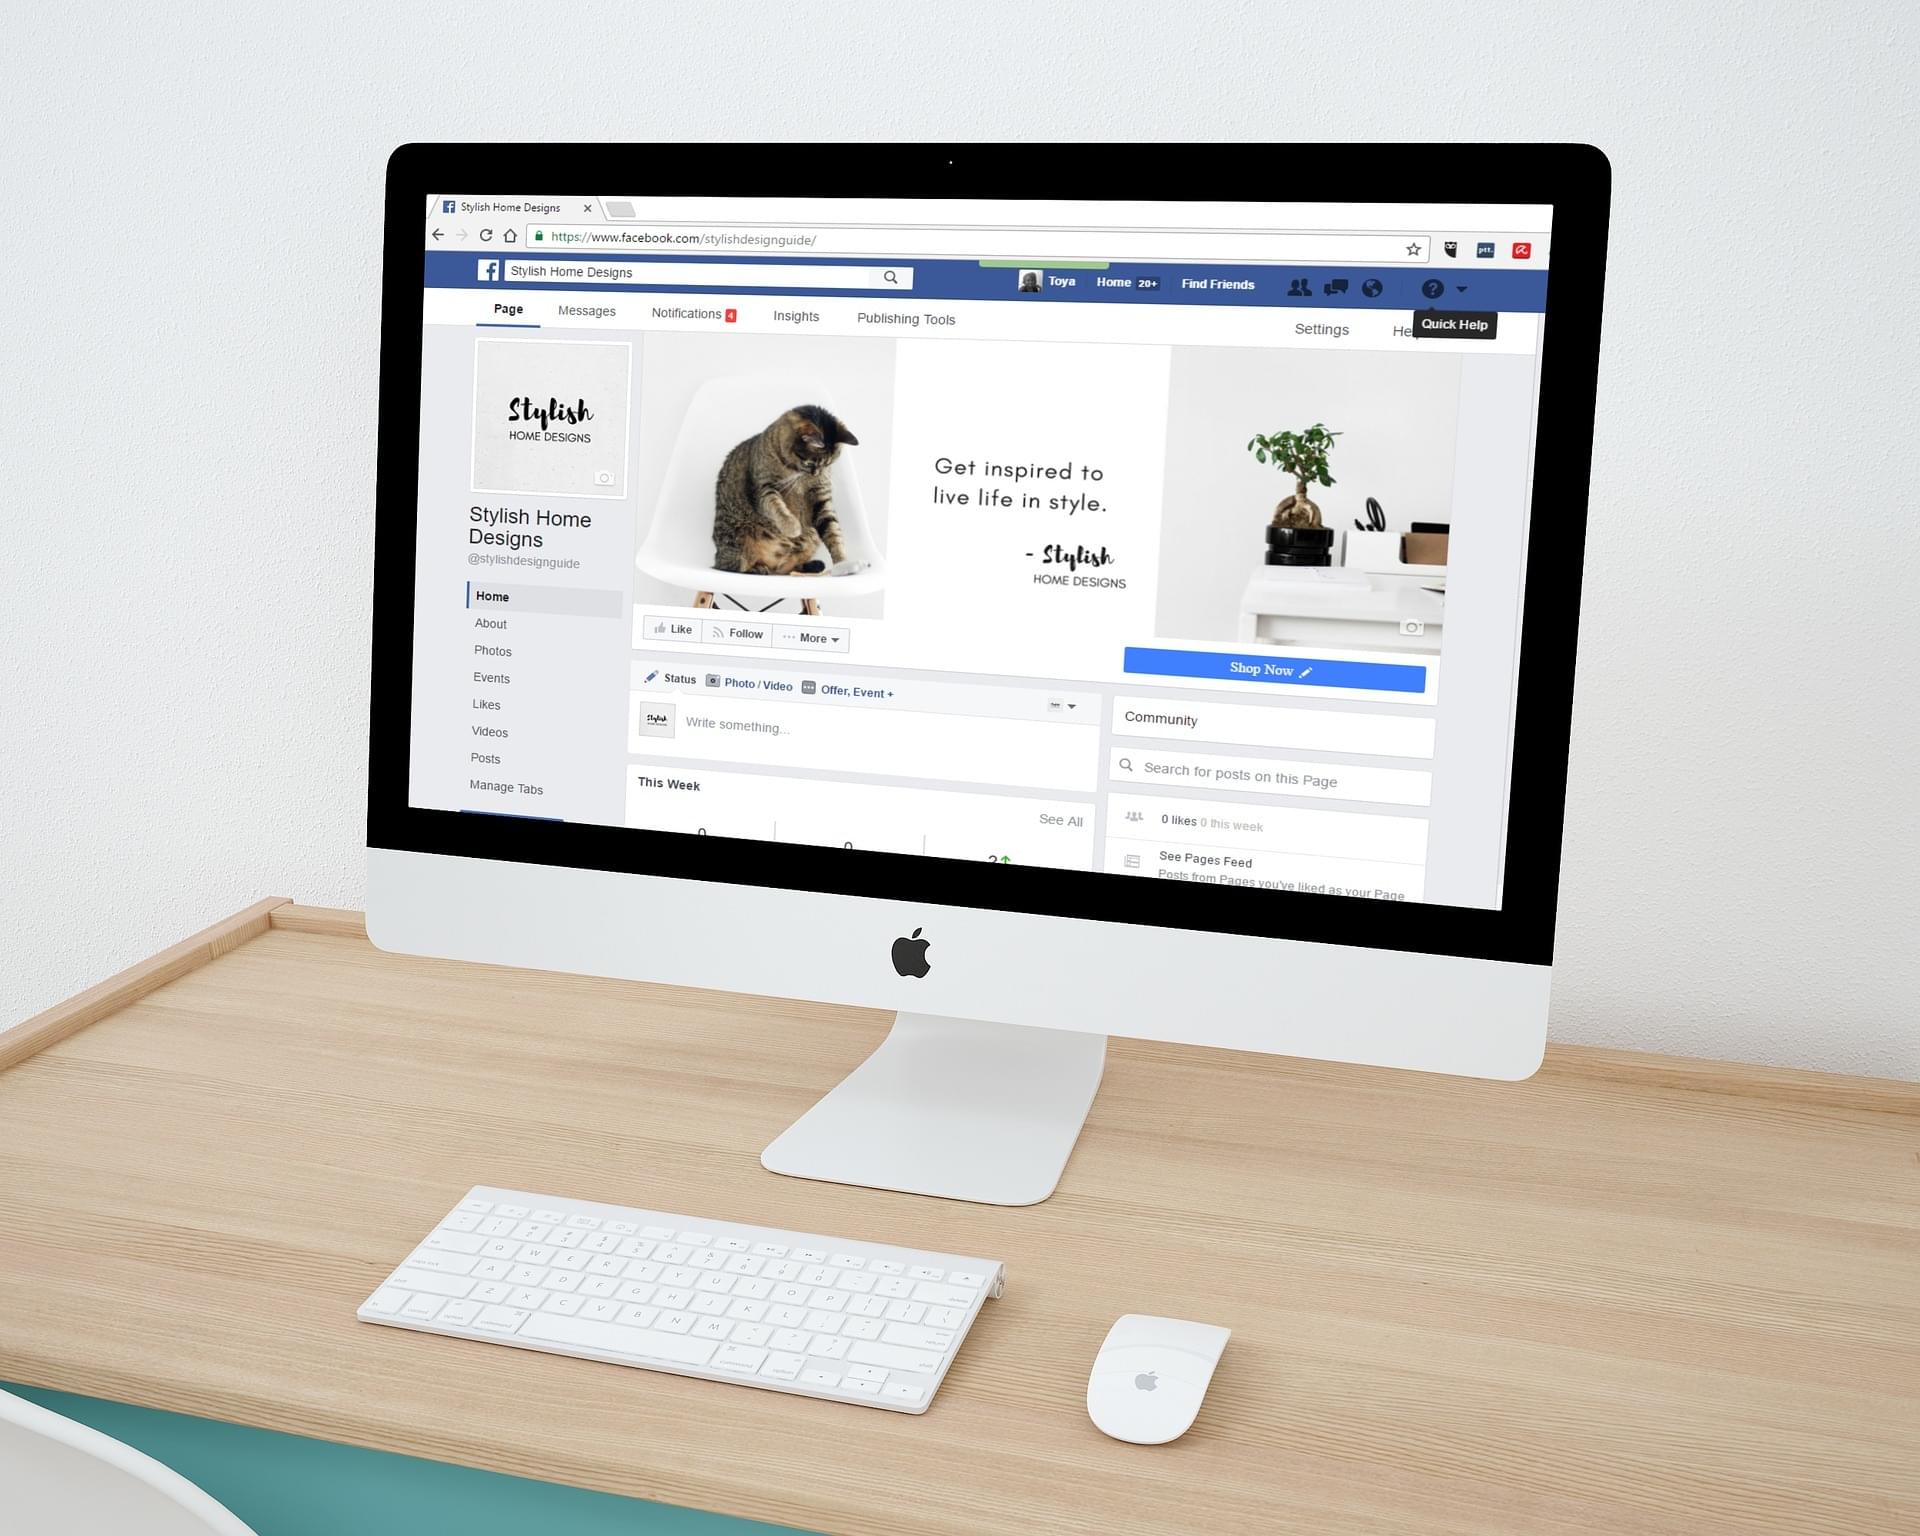 Facebook for Businesses